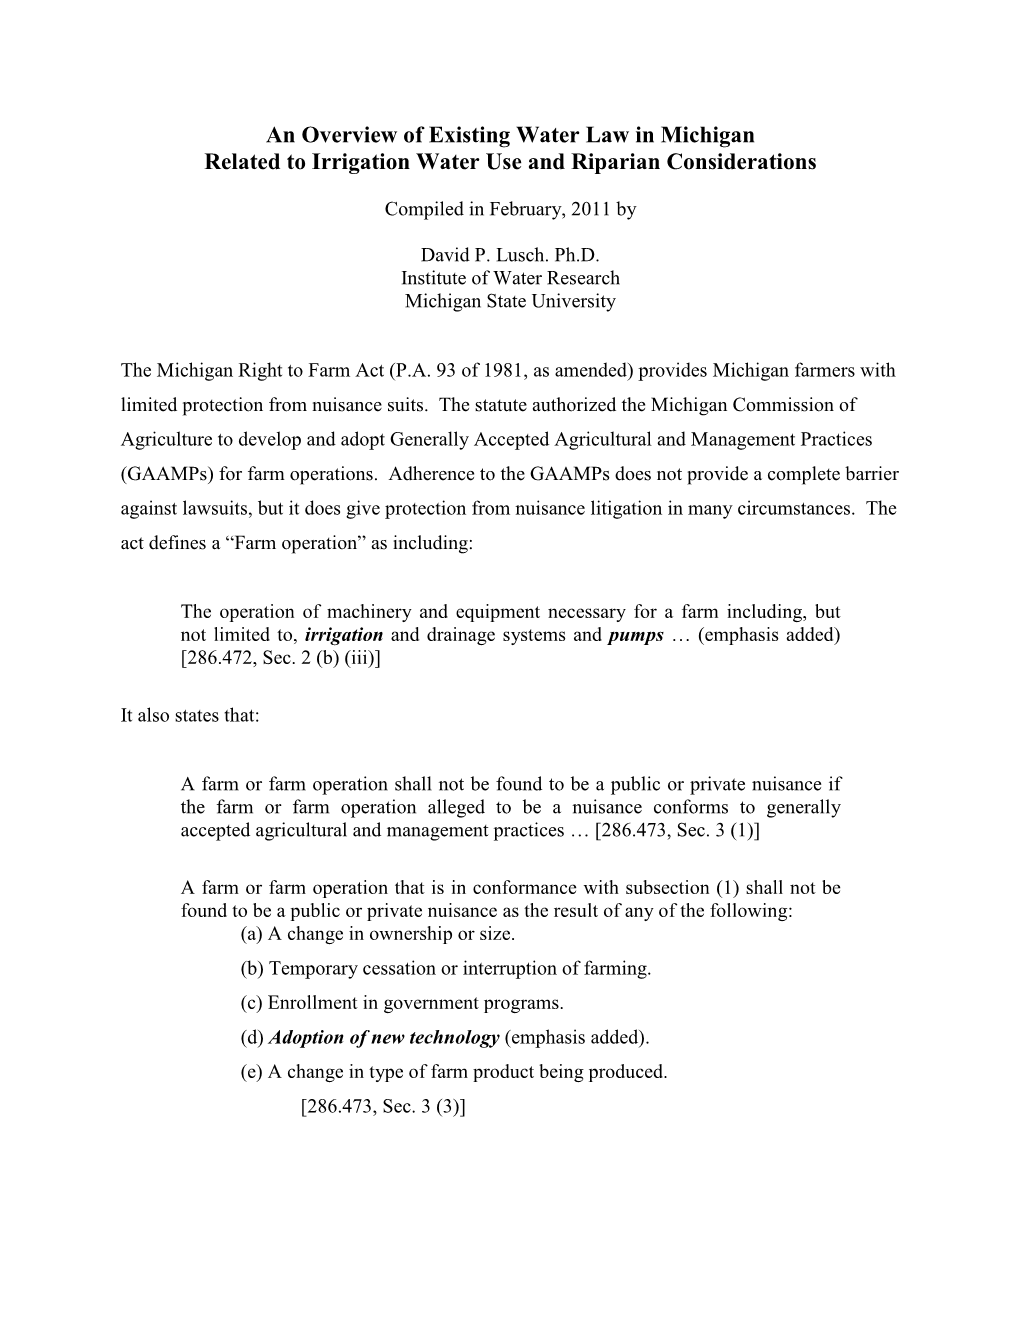 An Overview of Existing Water Law in Michigan Related to Irrigation Water Use and Riparian Considerations